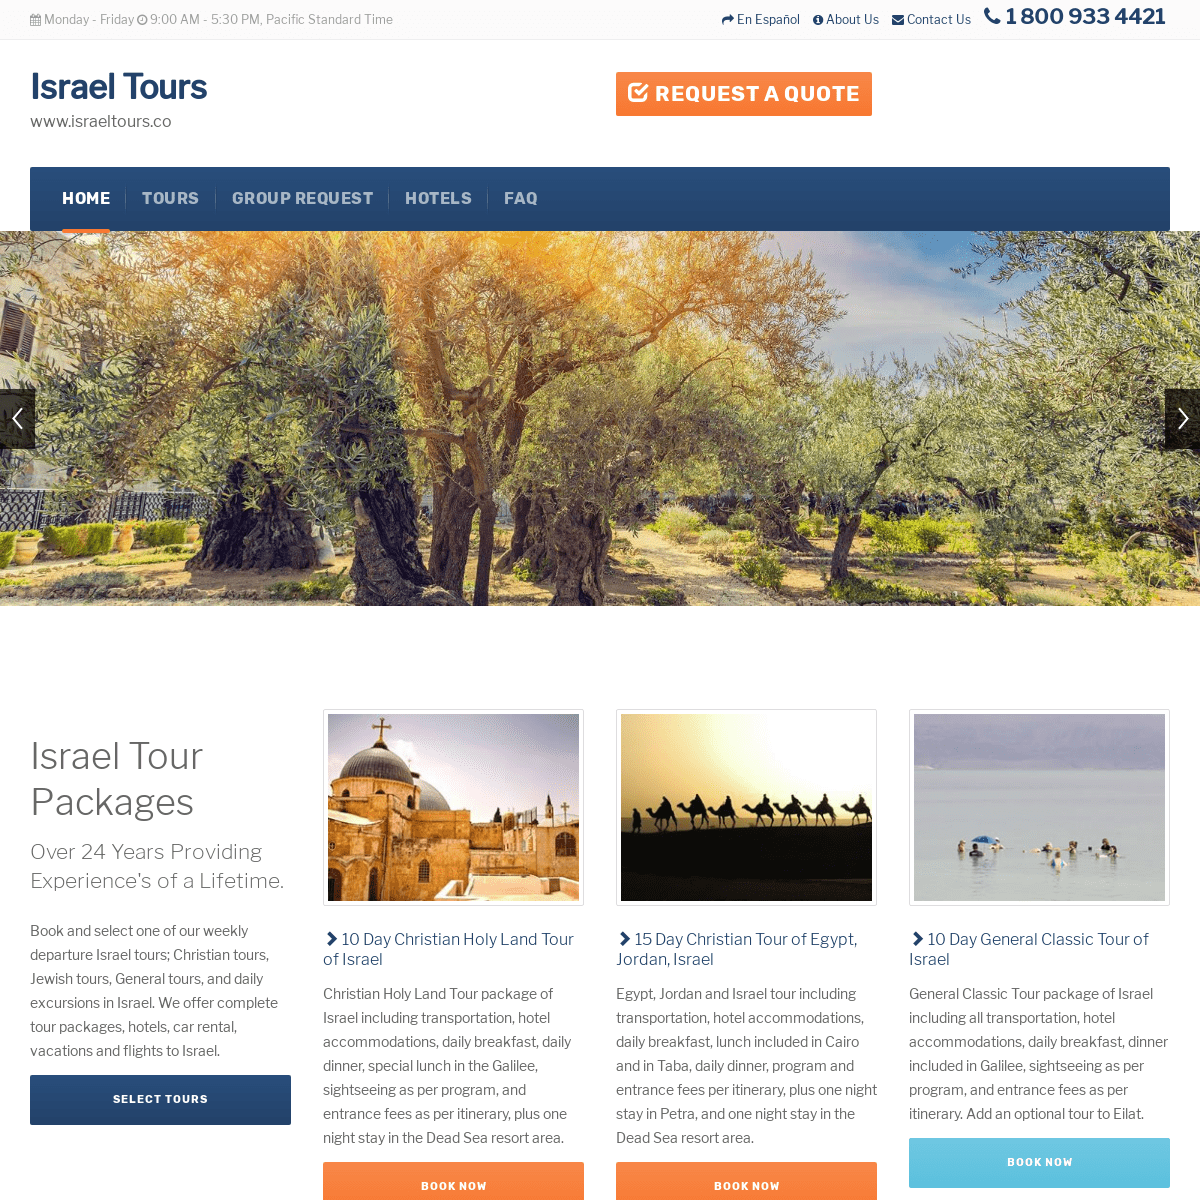 A complete backup of israeltours.co